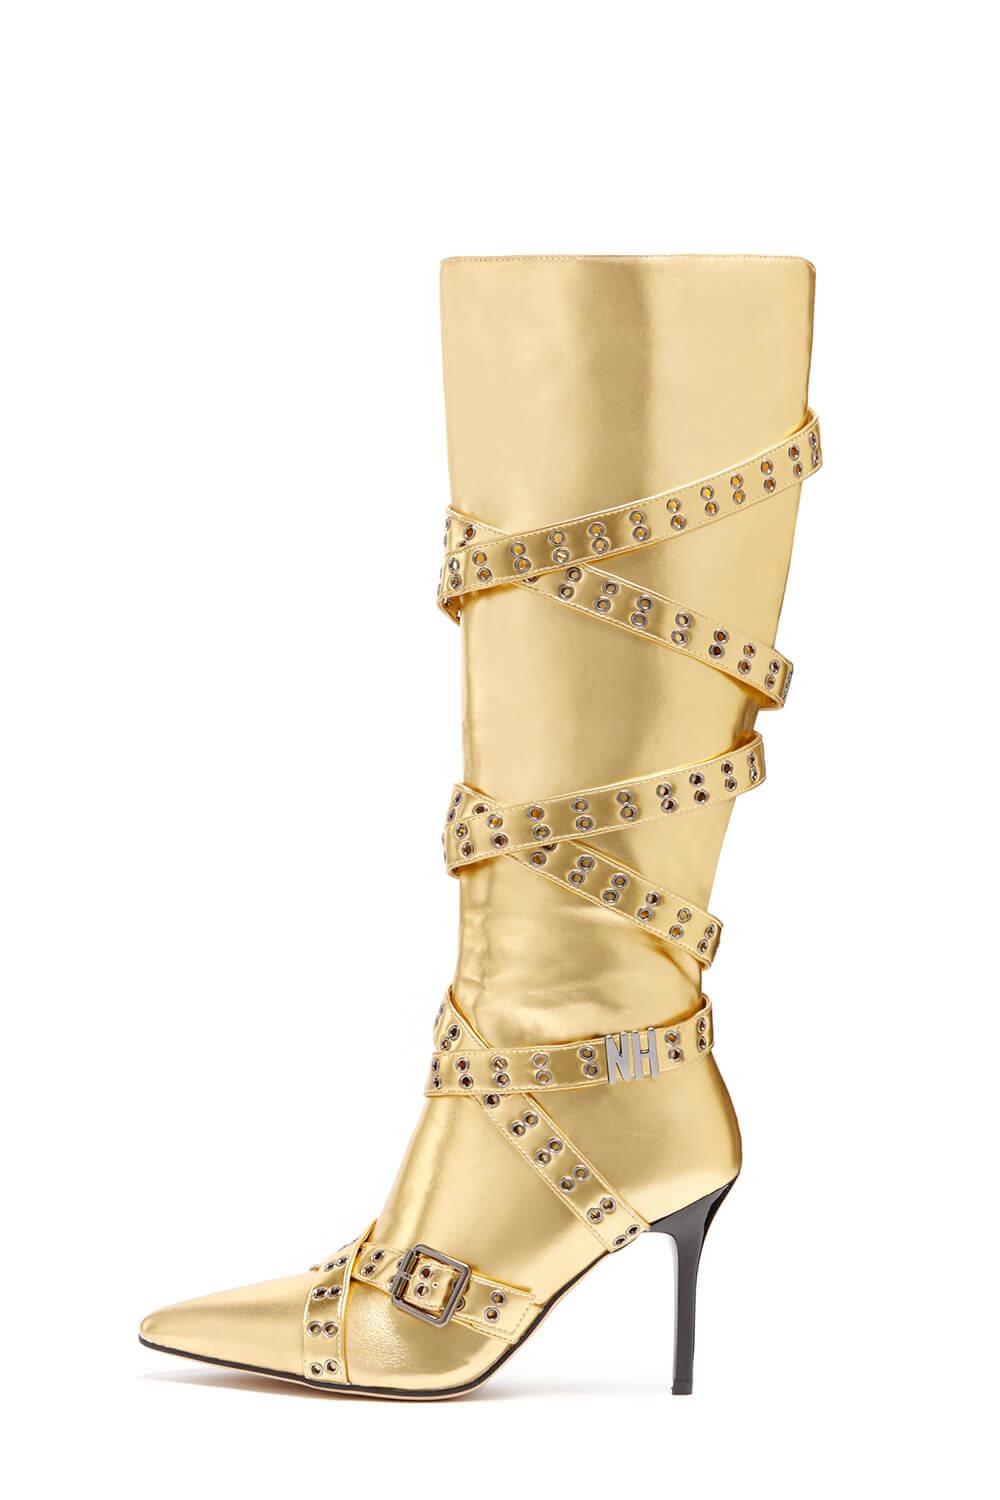 Strap Belt Pointed Toe Knee High Stiletto Boots With Buckle Details - Metallic Gold